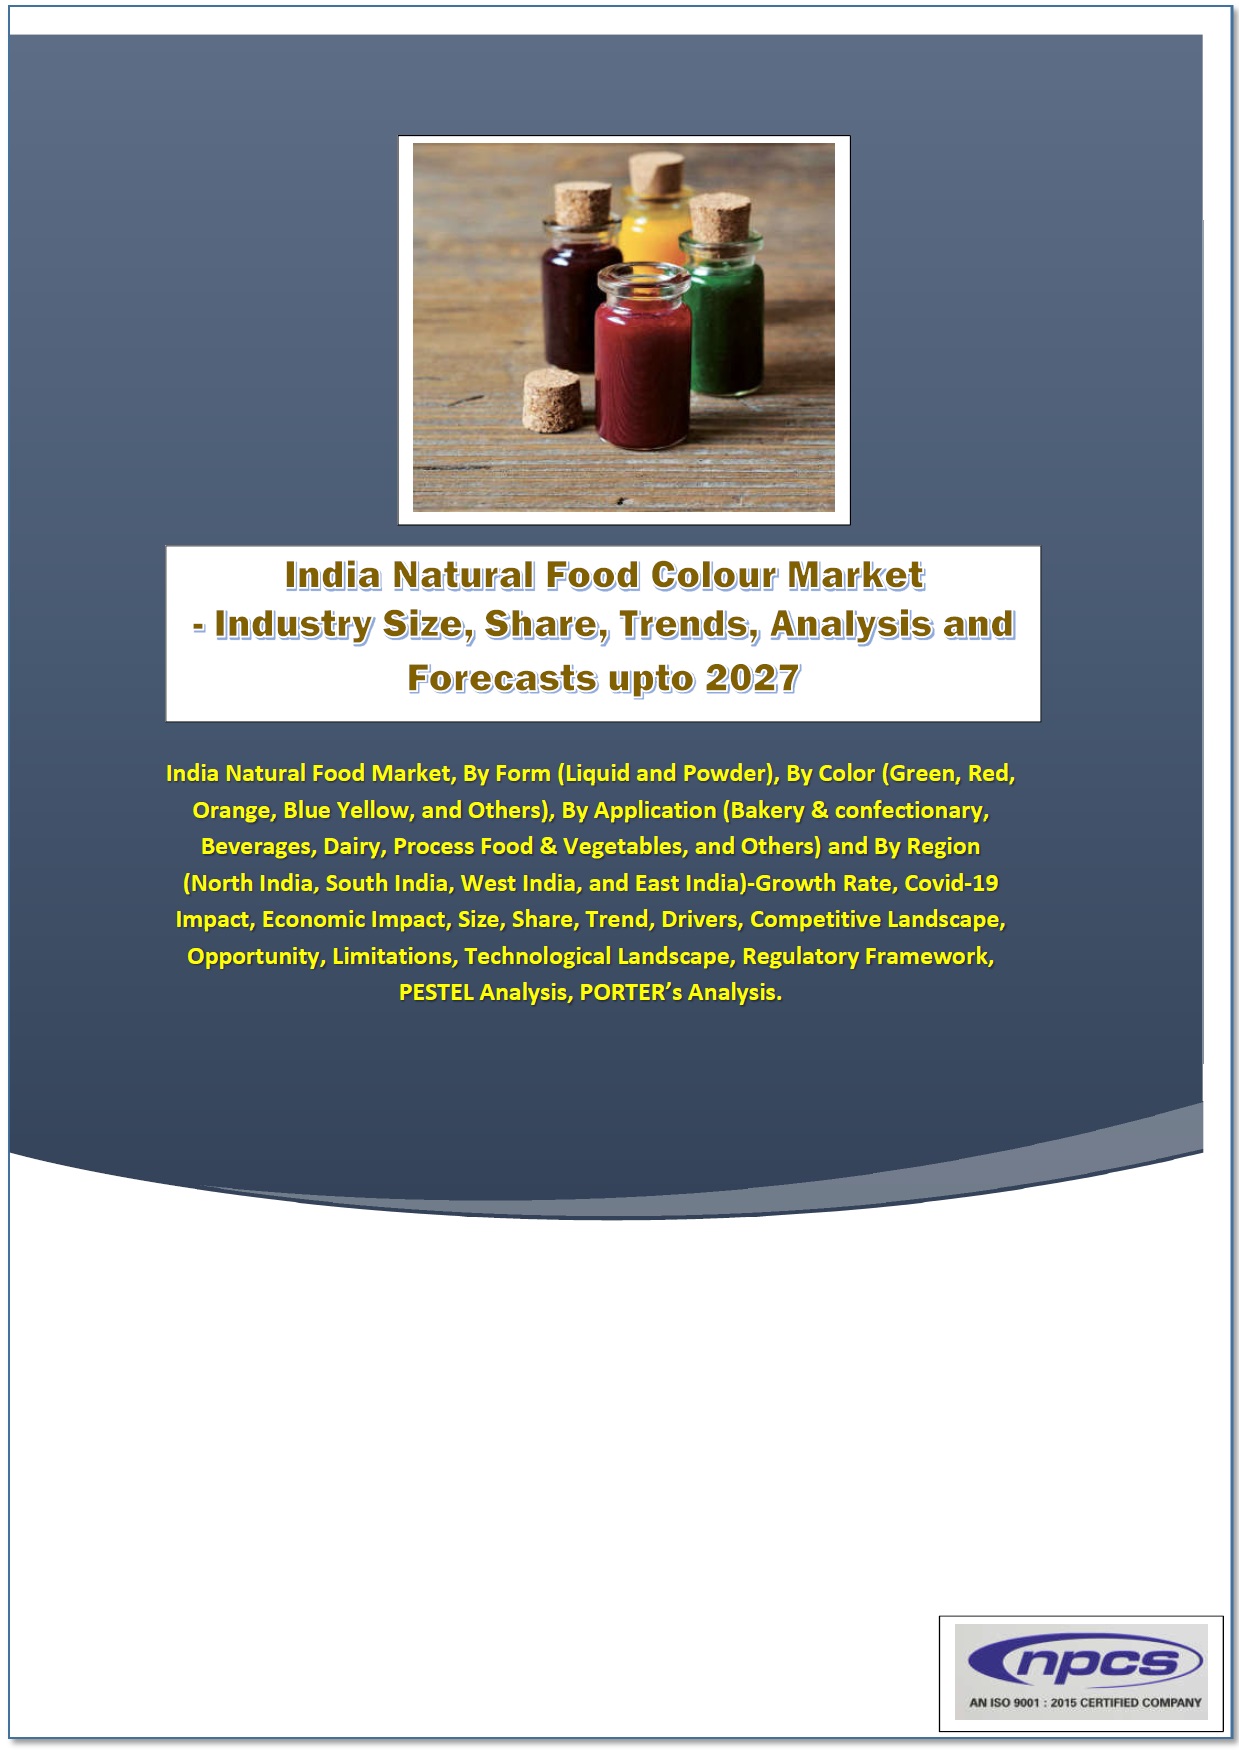 Market Research Report on-India Natural Food Colour Market - Industry-Size-Share-Trends-Analysis and Forecasts upto 2027